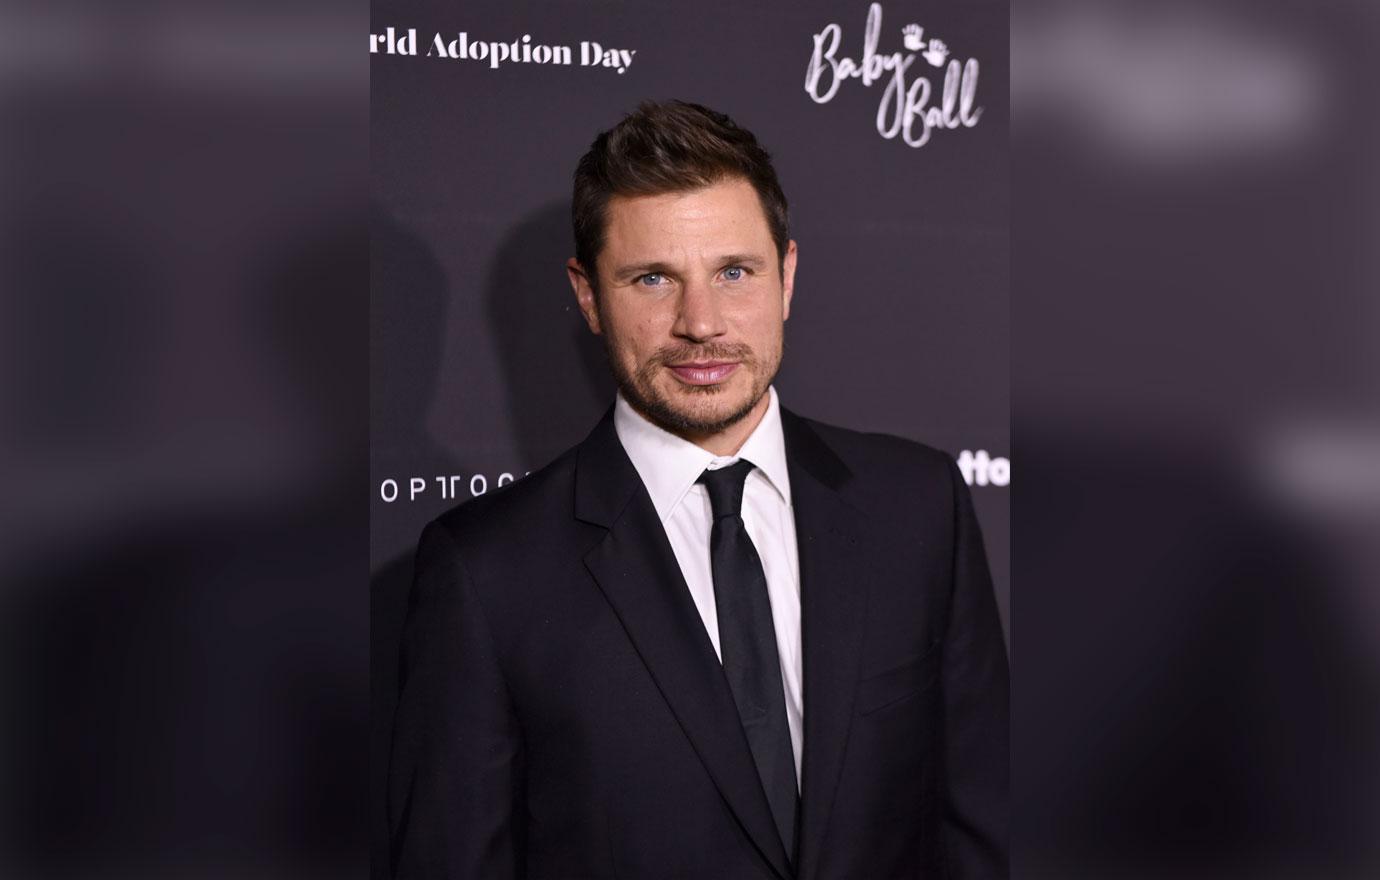 Nick Lachey Seeks Justice For Employee Hospitalized After Gun Shot